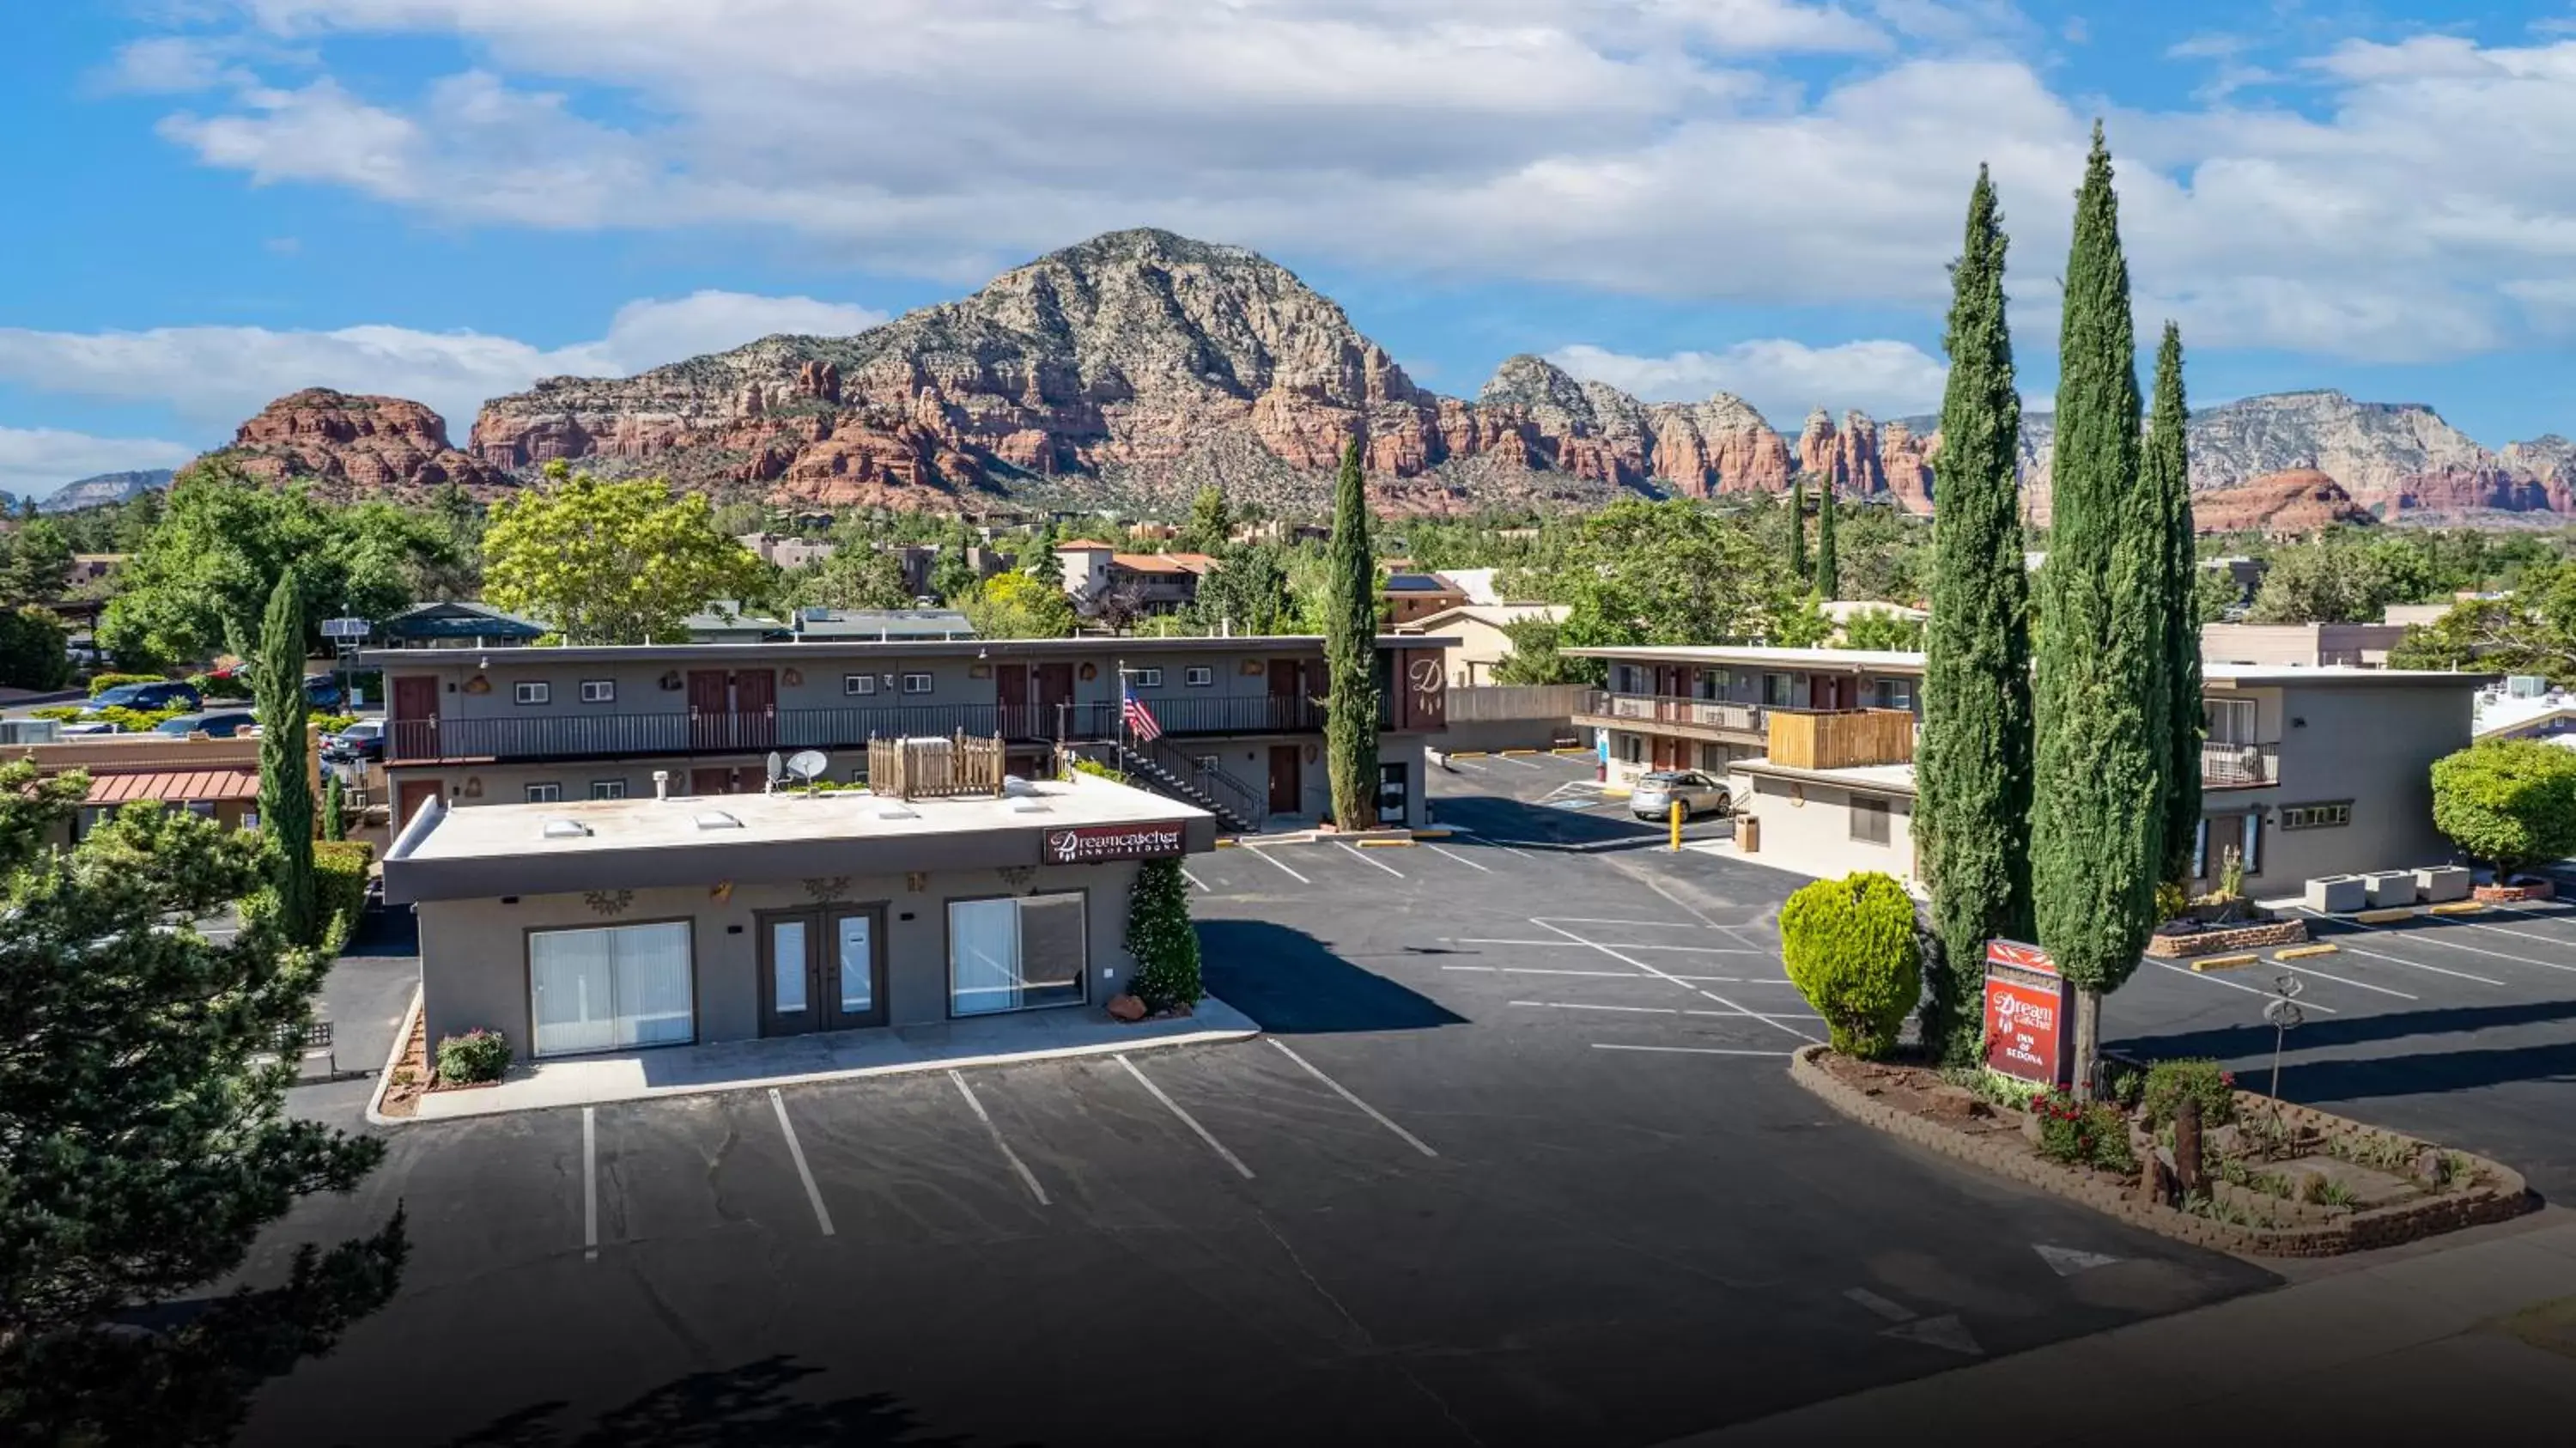 Property building, Mountain View in Dreamcatcher Inn of Sedona